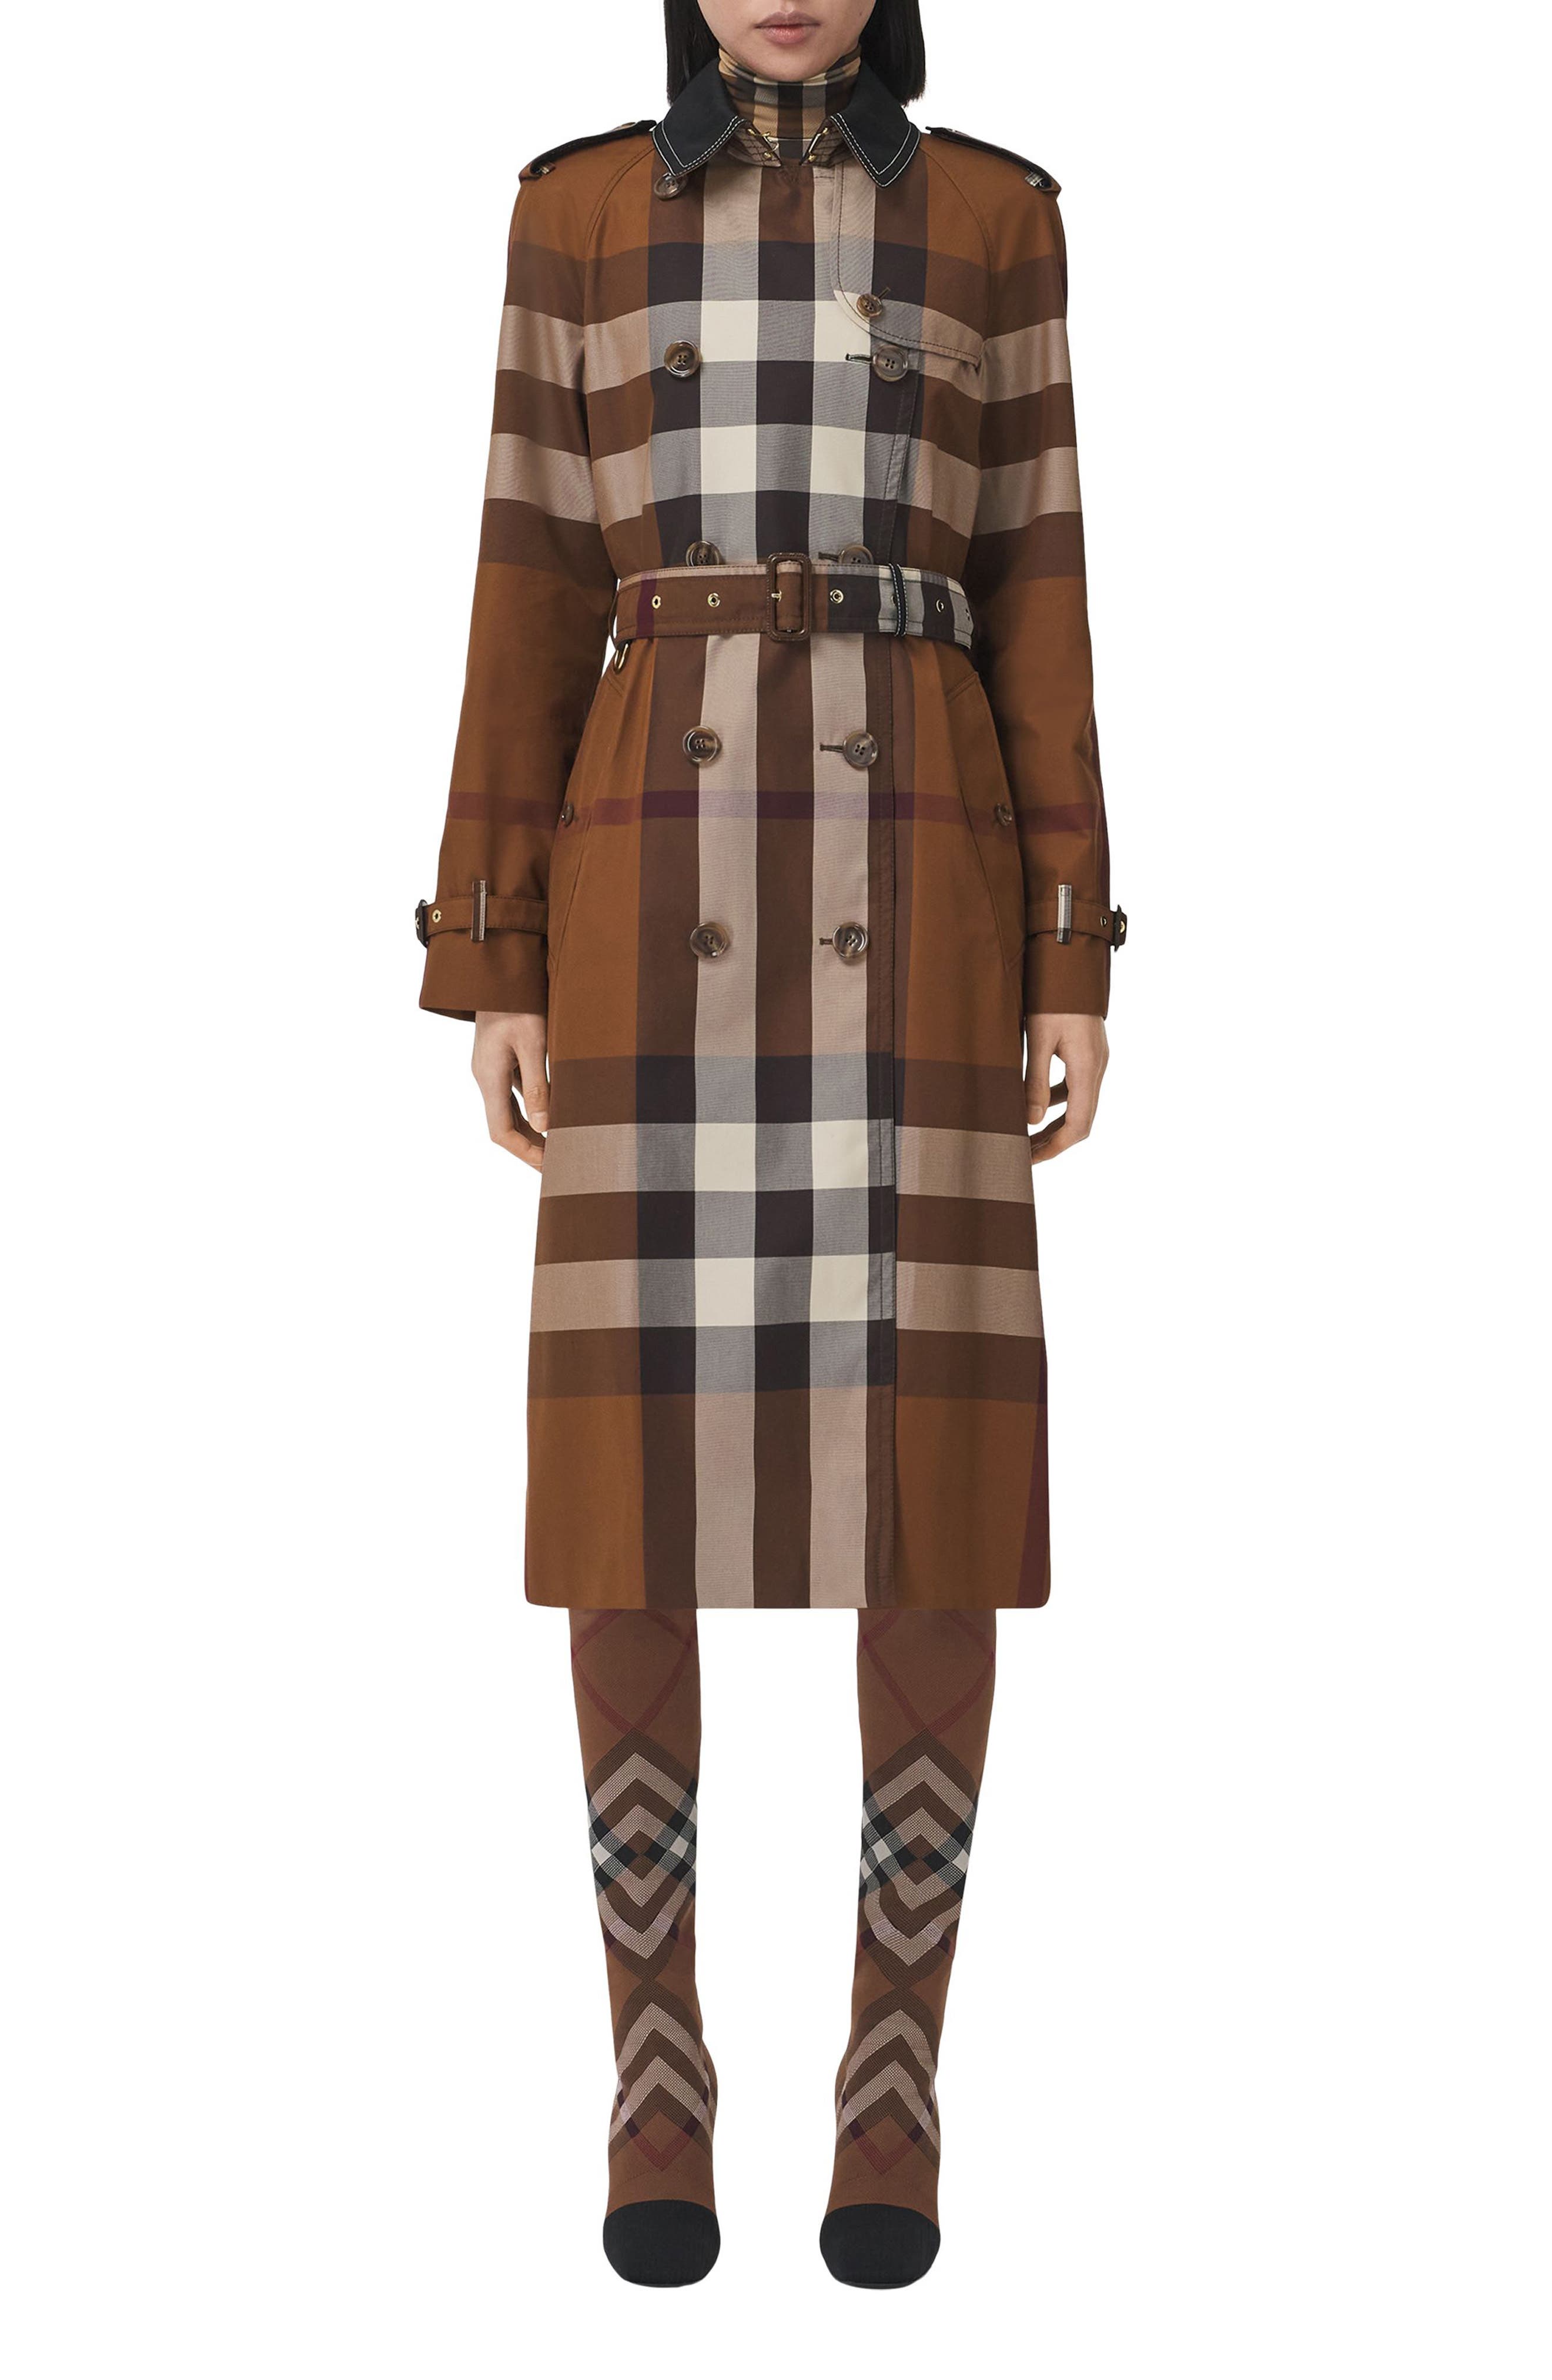 Burberry Check Waterloo Fit Double Breasted Trench Coat in Dark Birch Brown Chk at Nordstrom